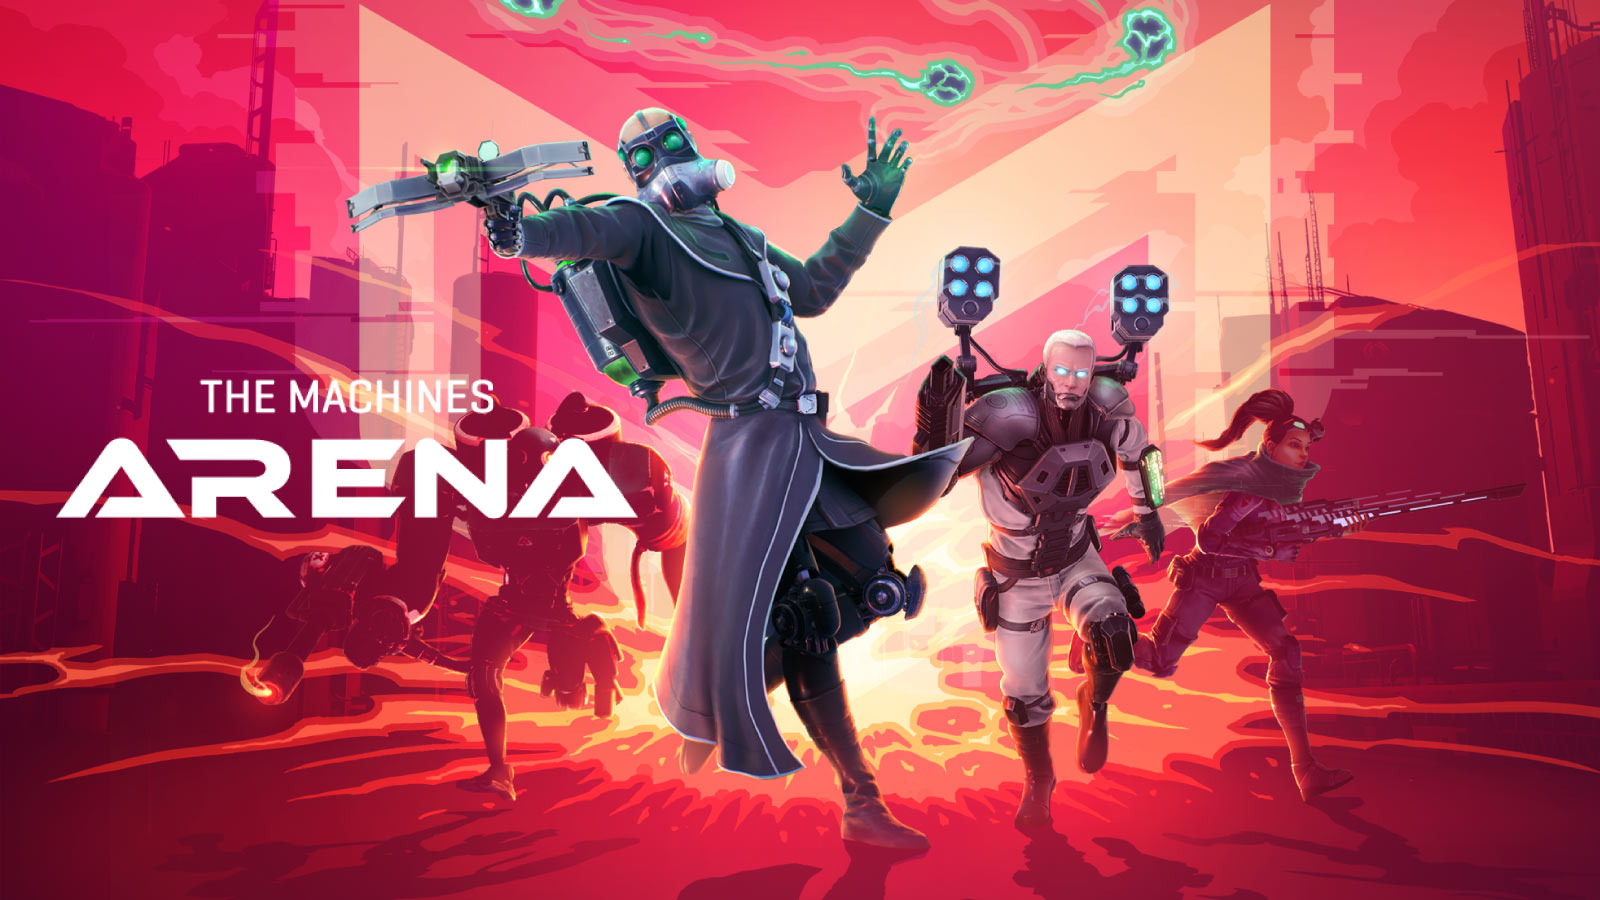 The Machines Arena next level in competitive hero shooters blasts into Steam Closed Beta Soon!